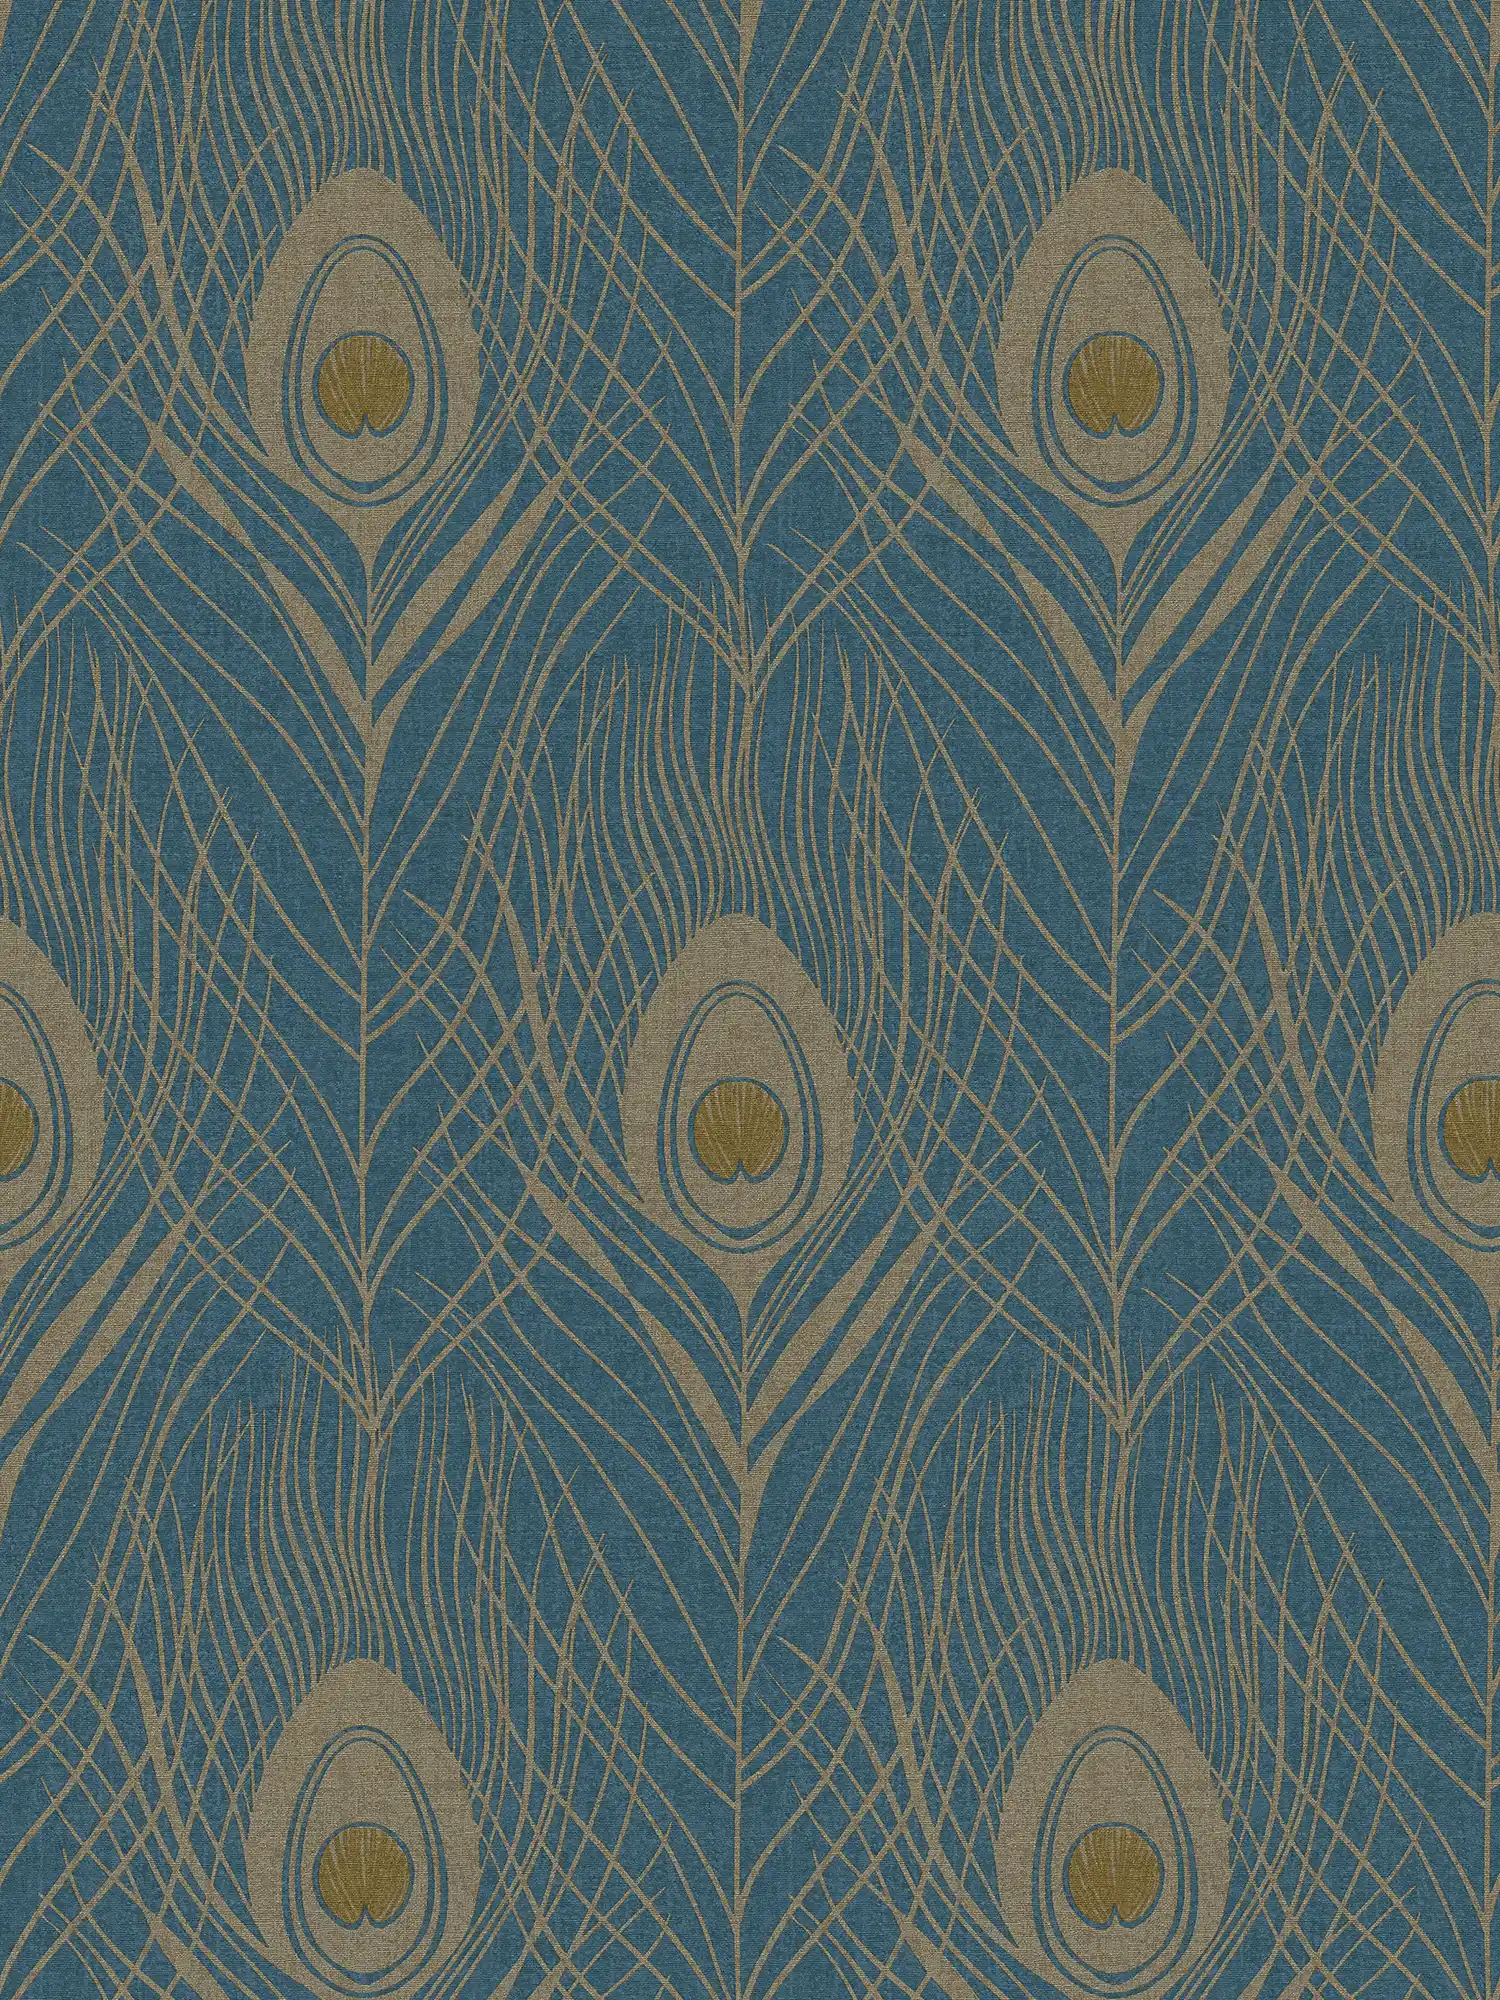         Non-woven wallpaper with peacock feathers, metallic look - blue, gold, yellow
    